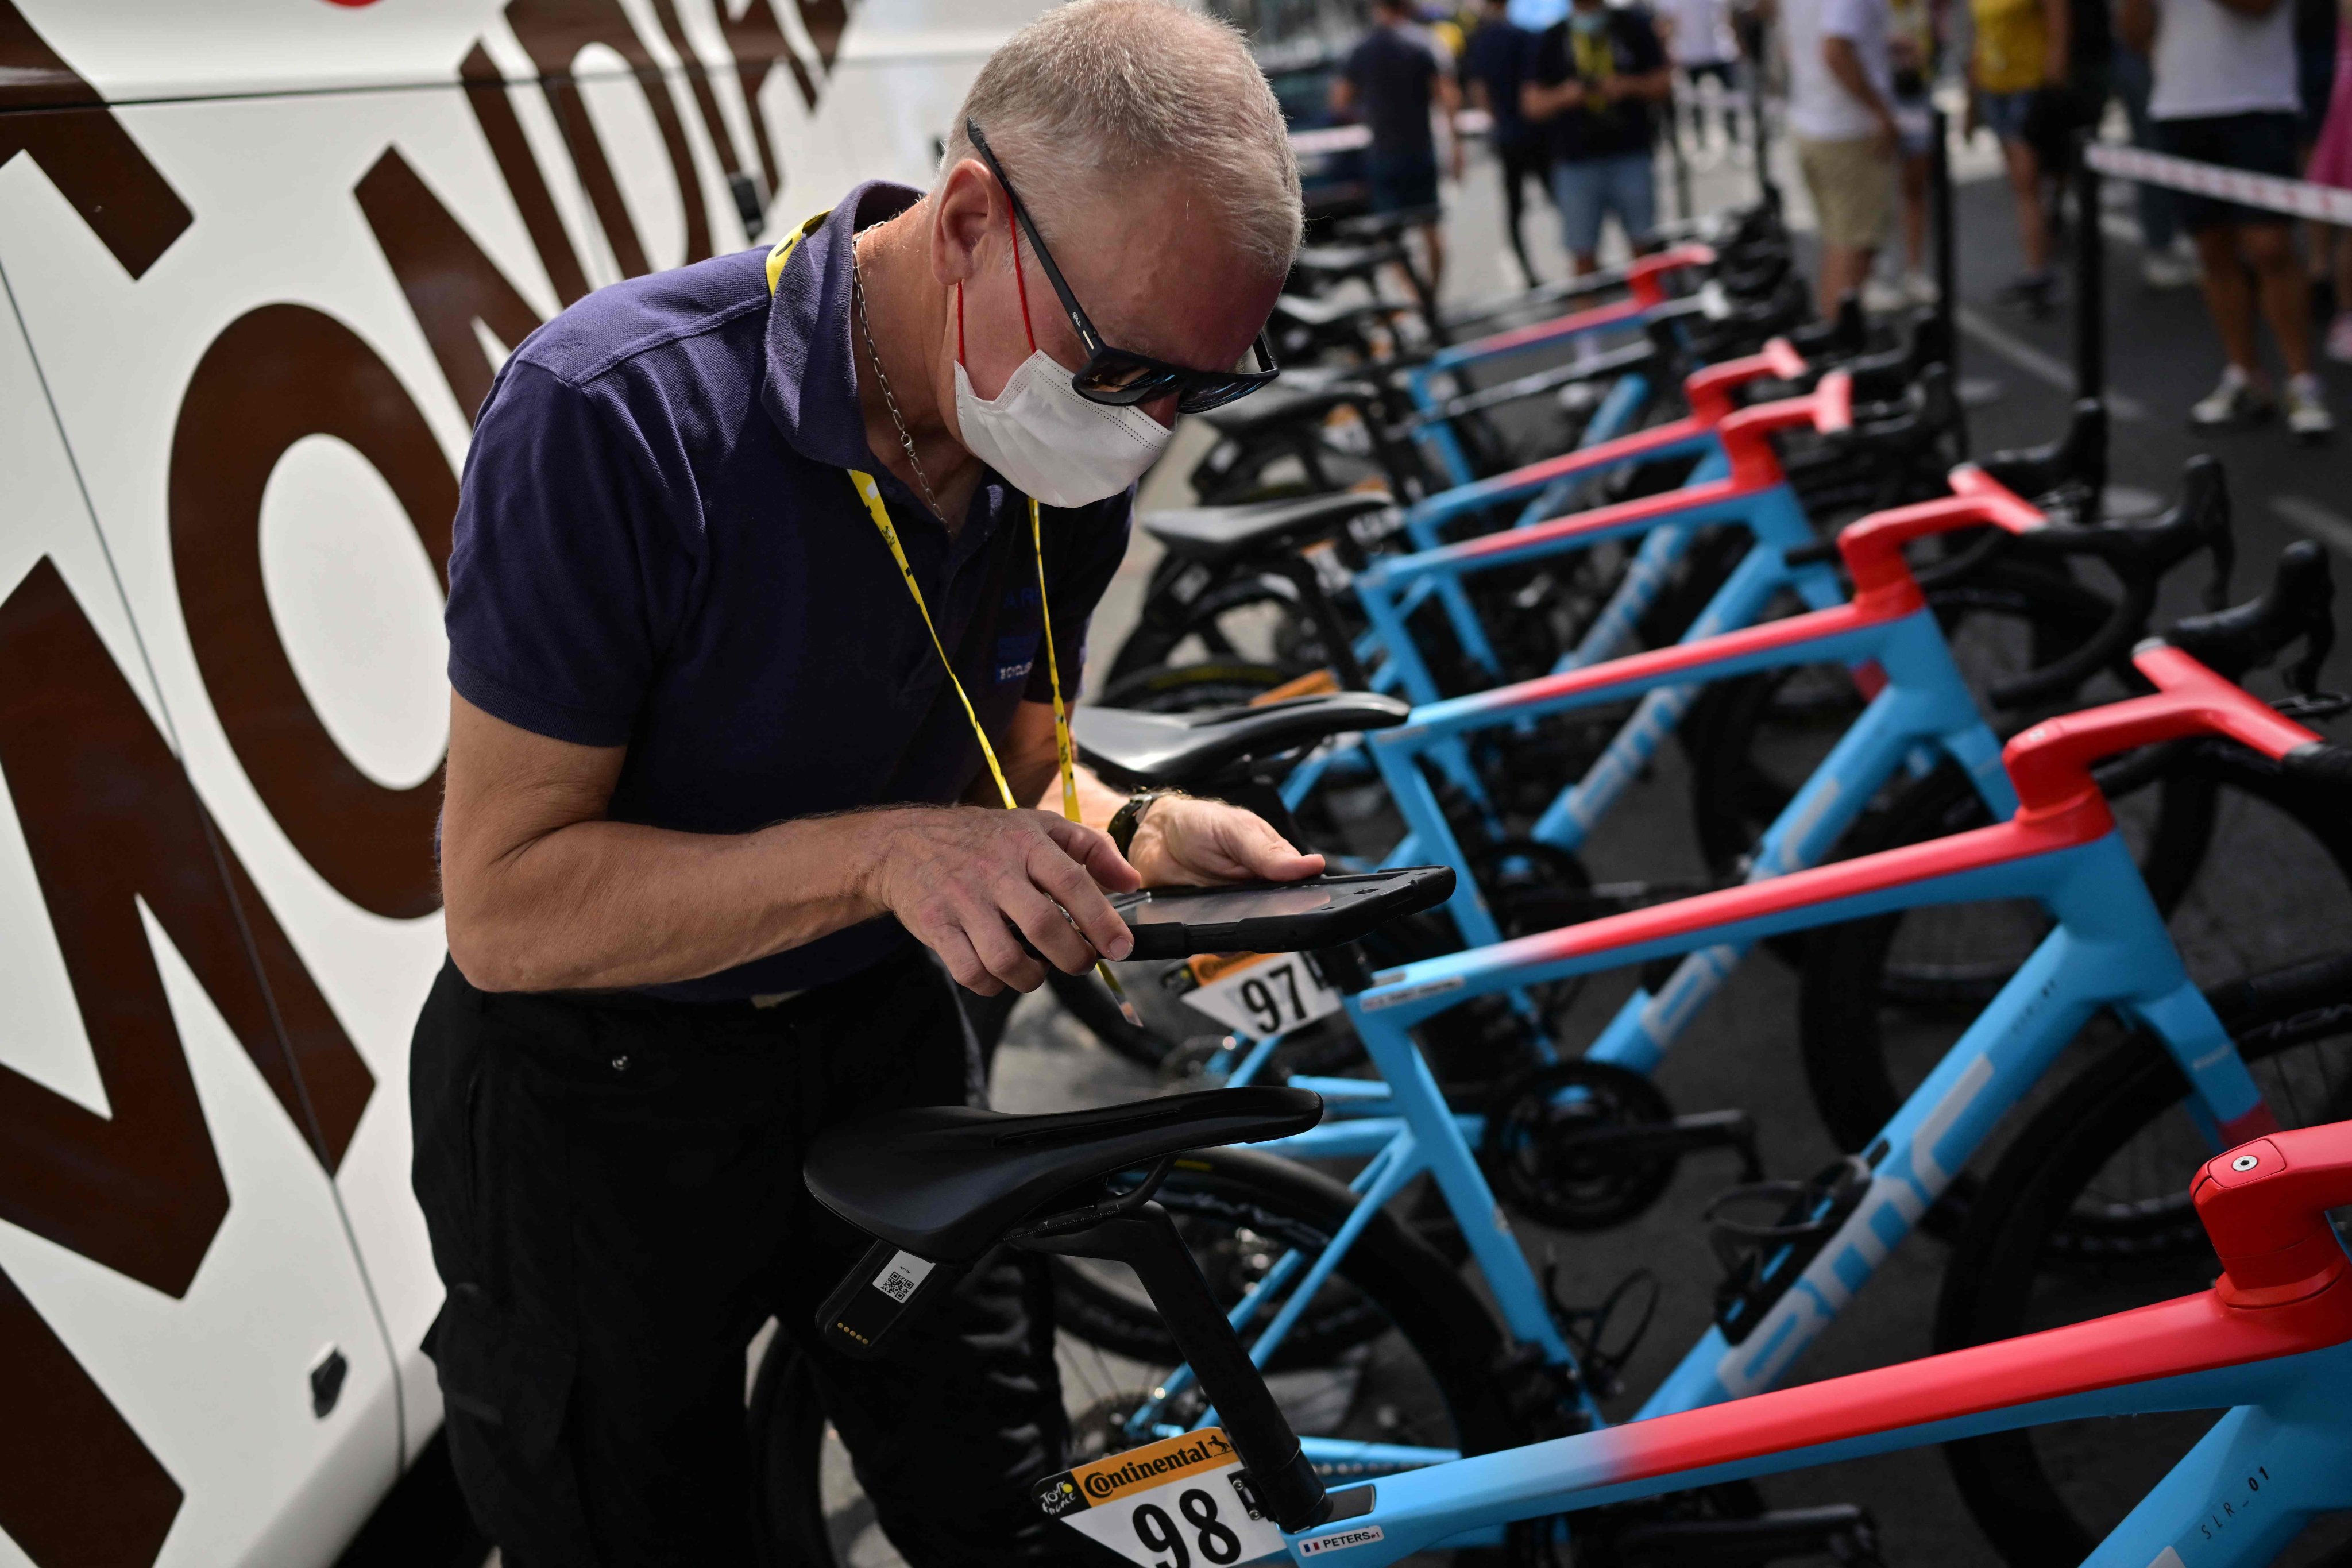 A UCI (Union Cycliste Internationale) official performs a technical control on AG2R Citroen Team bicycles before the start of the 11th stage of the 110th edition of the Tour de France. Photo: AFP